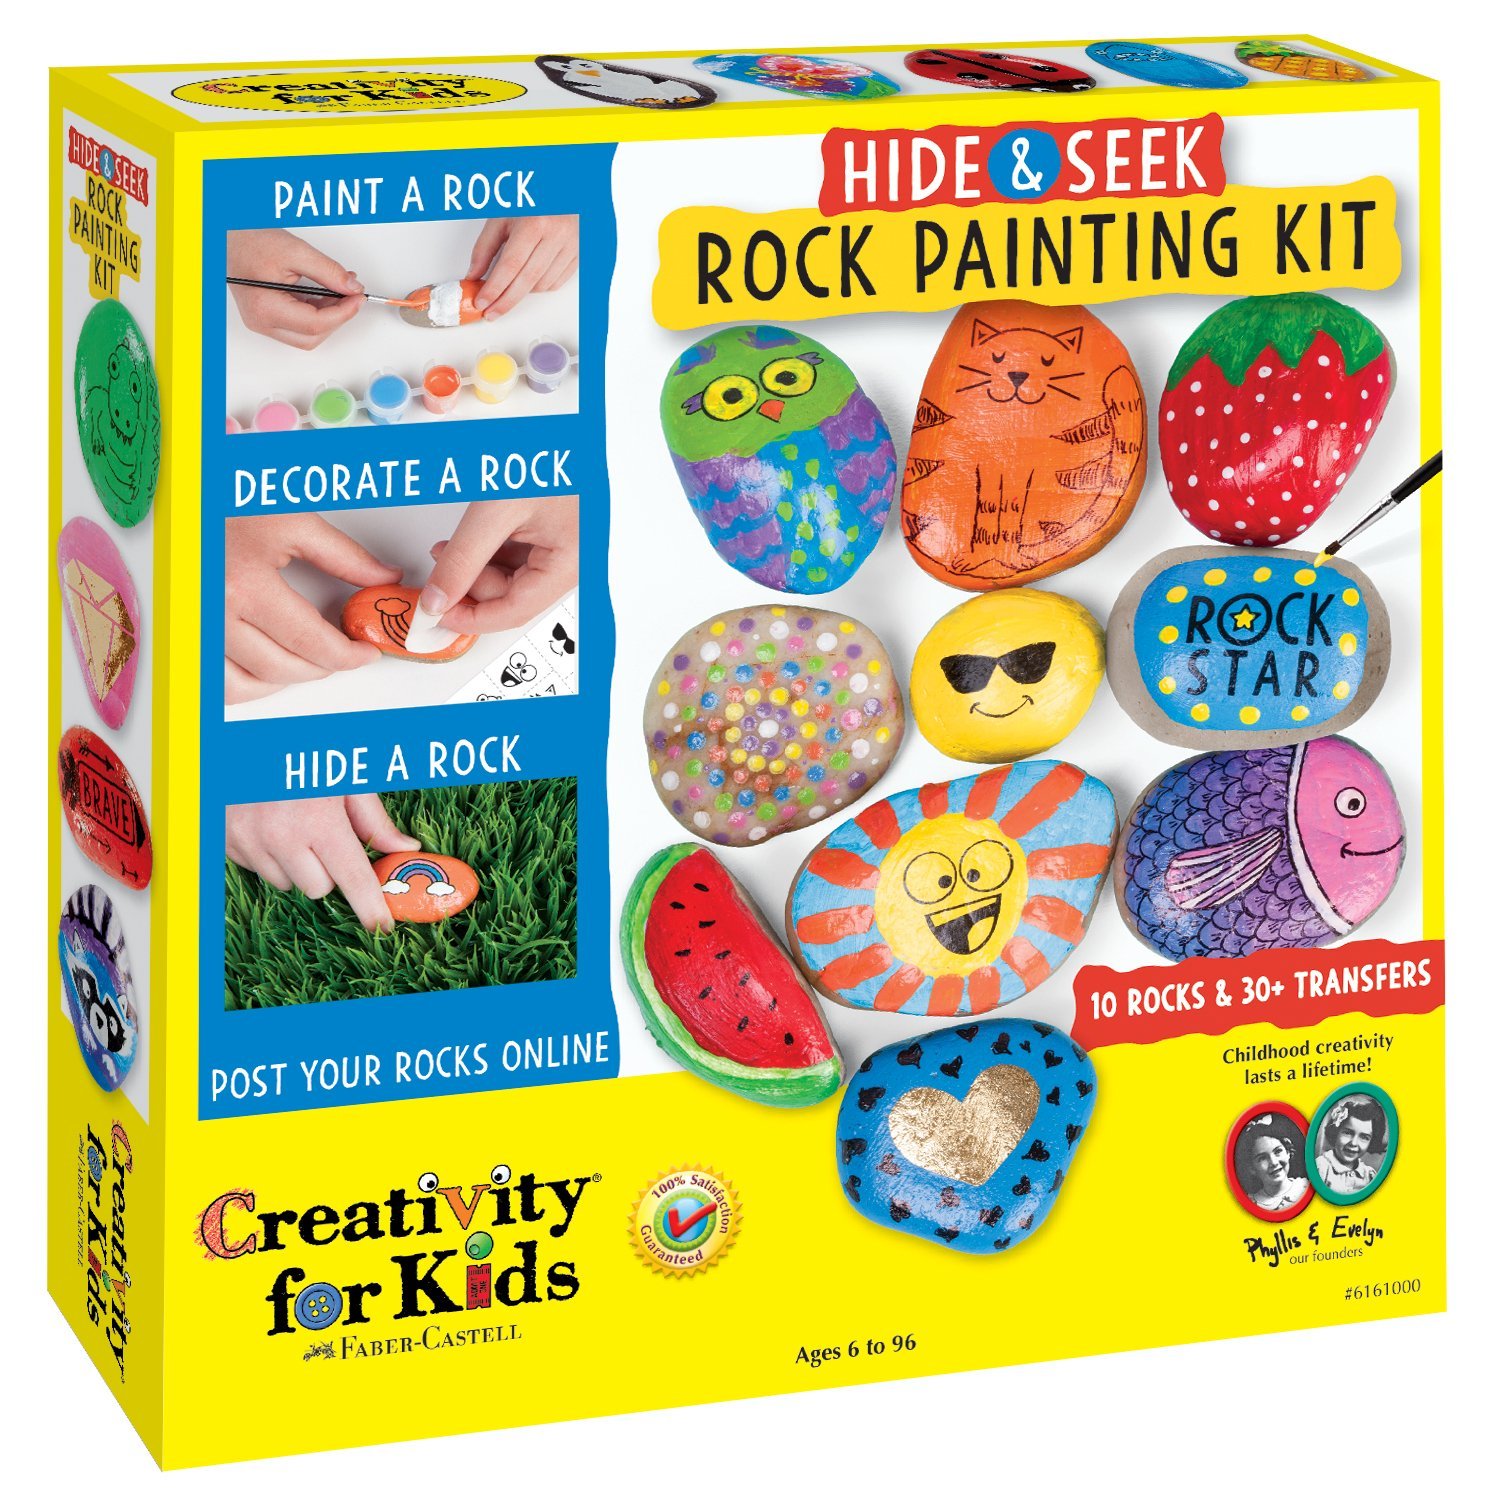 3 Creative Gift Ideas For Kids